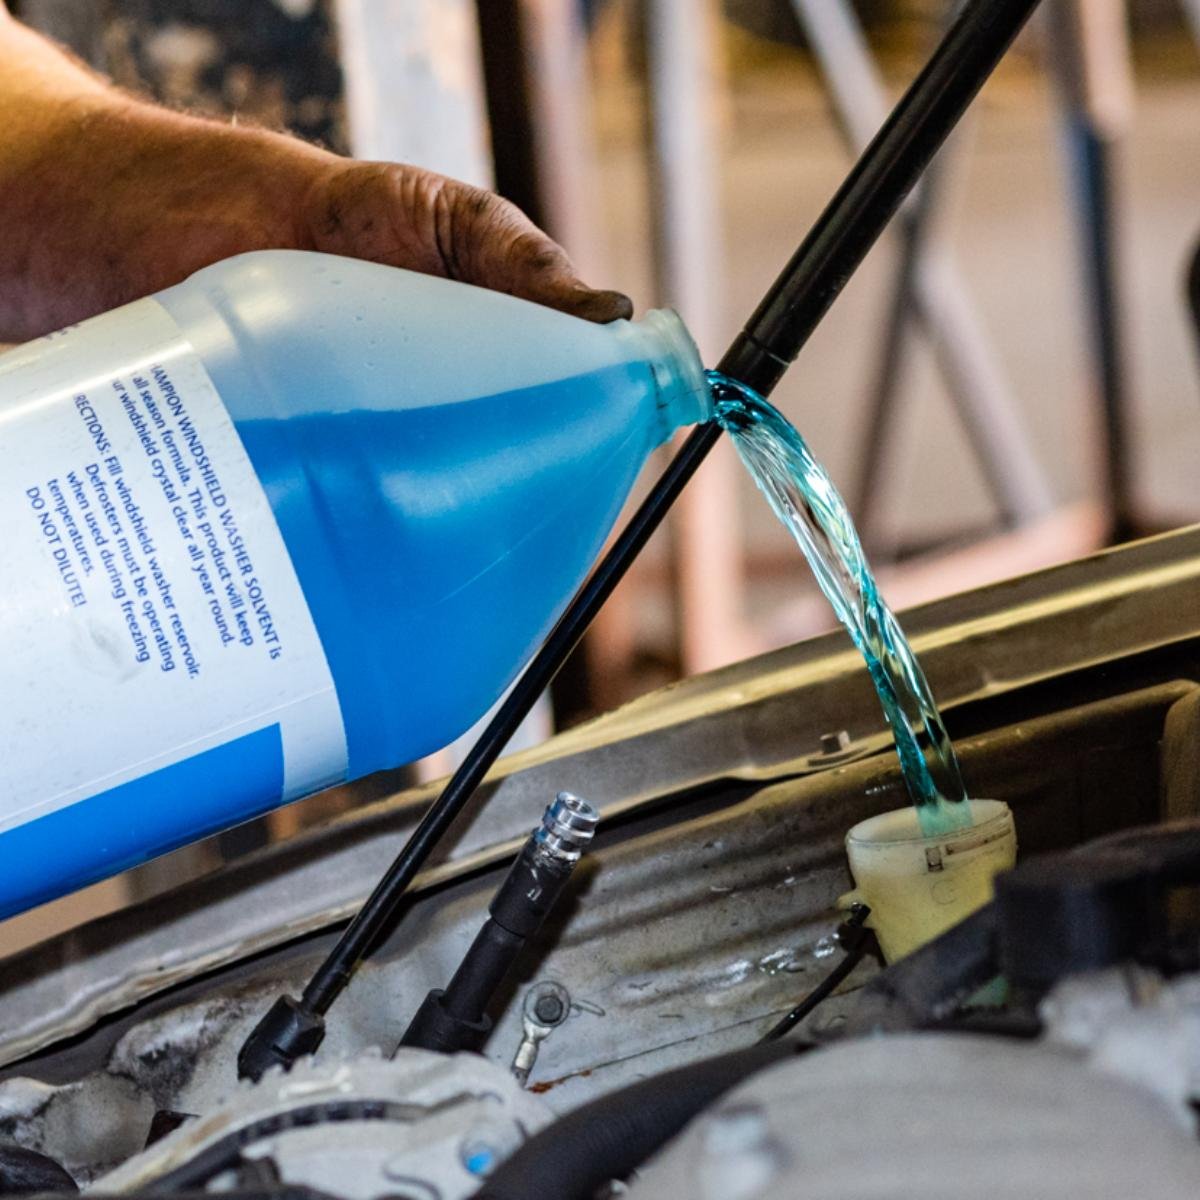 Stewart's Auto Svc on X: Car care tip: Windshield washer fluid is the best  solution for removing bugs, dirt, and anything else that lands on your  vehicle's windshield, so be sure to